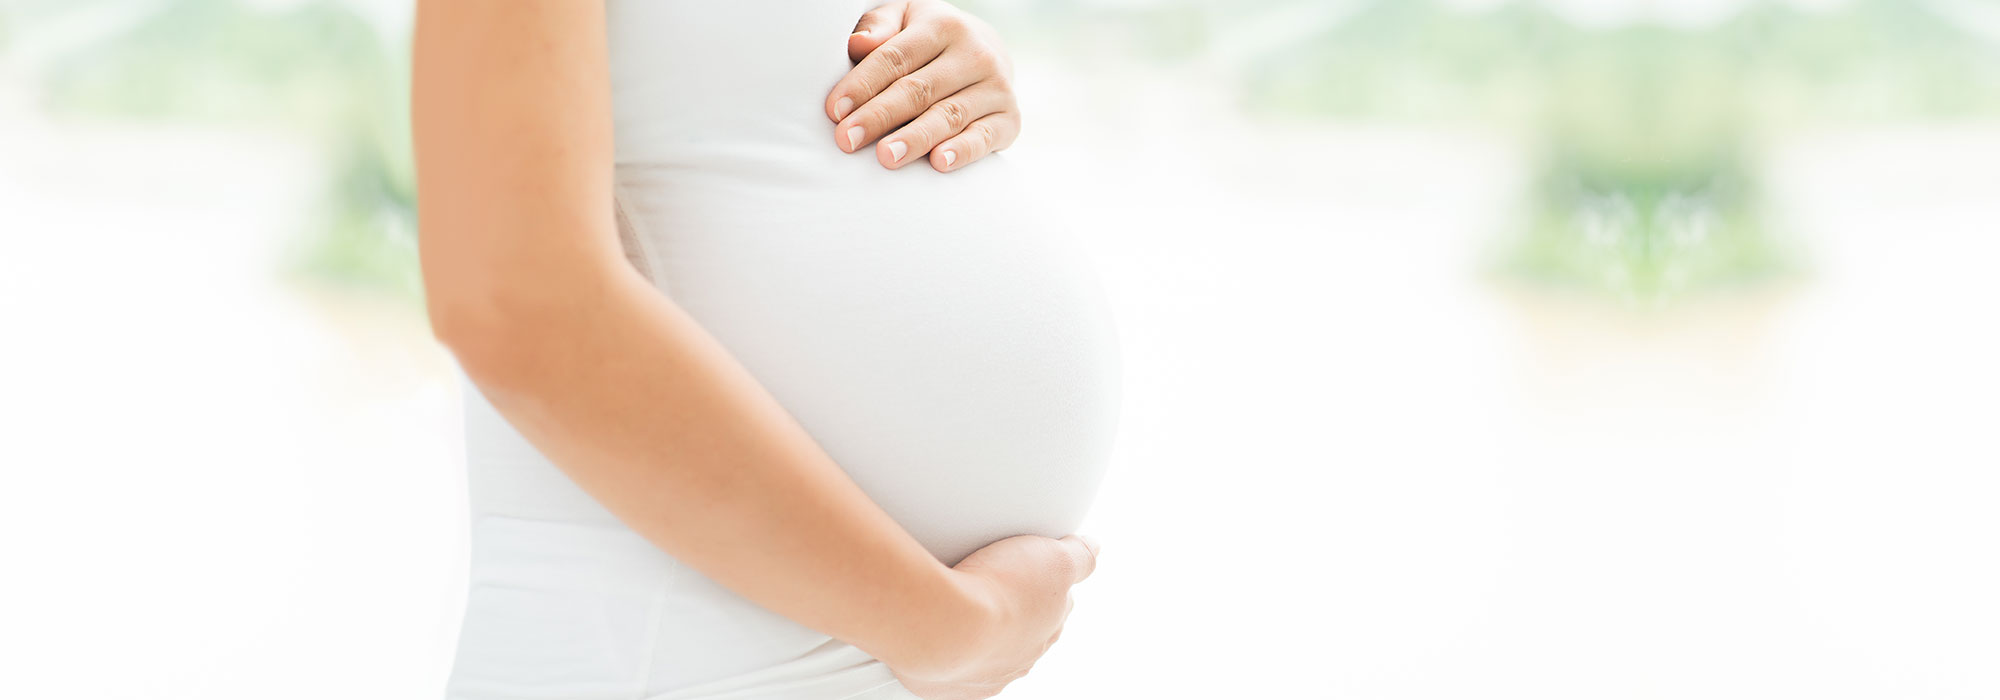 Fibromyalgia and Pregnancy: What Do I Need to Know?